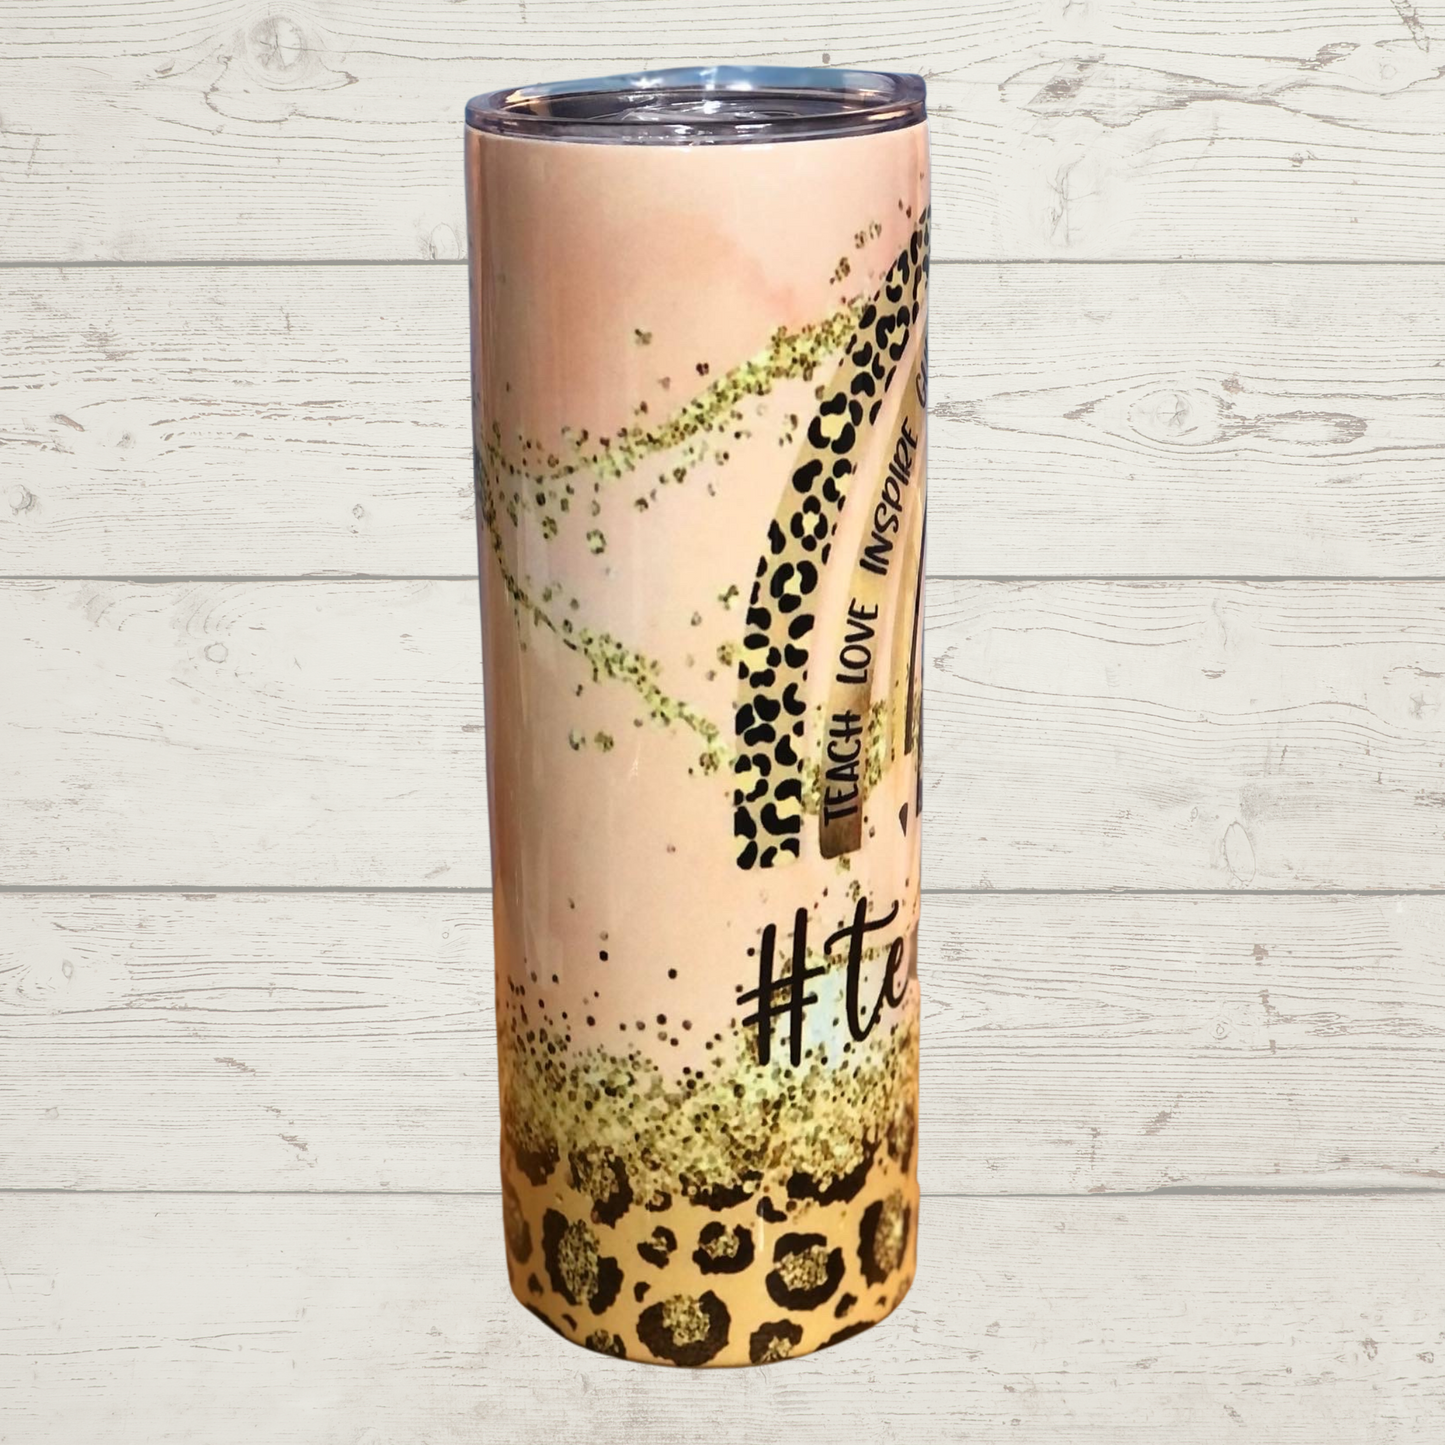 20 oz #TeacherLife Sublimation Tumbler with Quality Sealing Lid and Stainless Steel Straw, Teach Love Inspire Guide Praise Influence Encourage Listen Leopard Print Hearts Rainbow Pink Gold Glitter